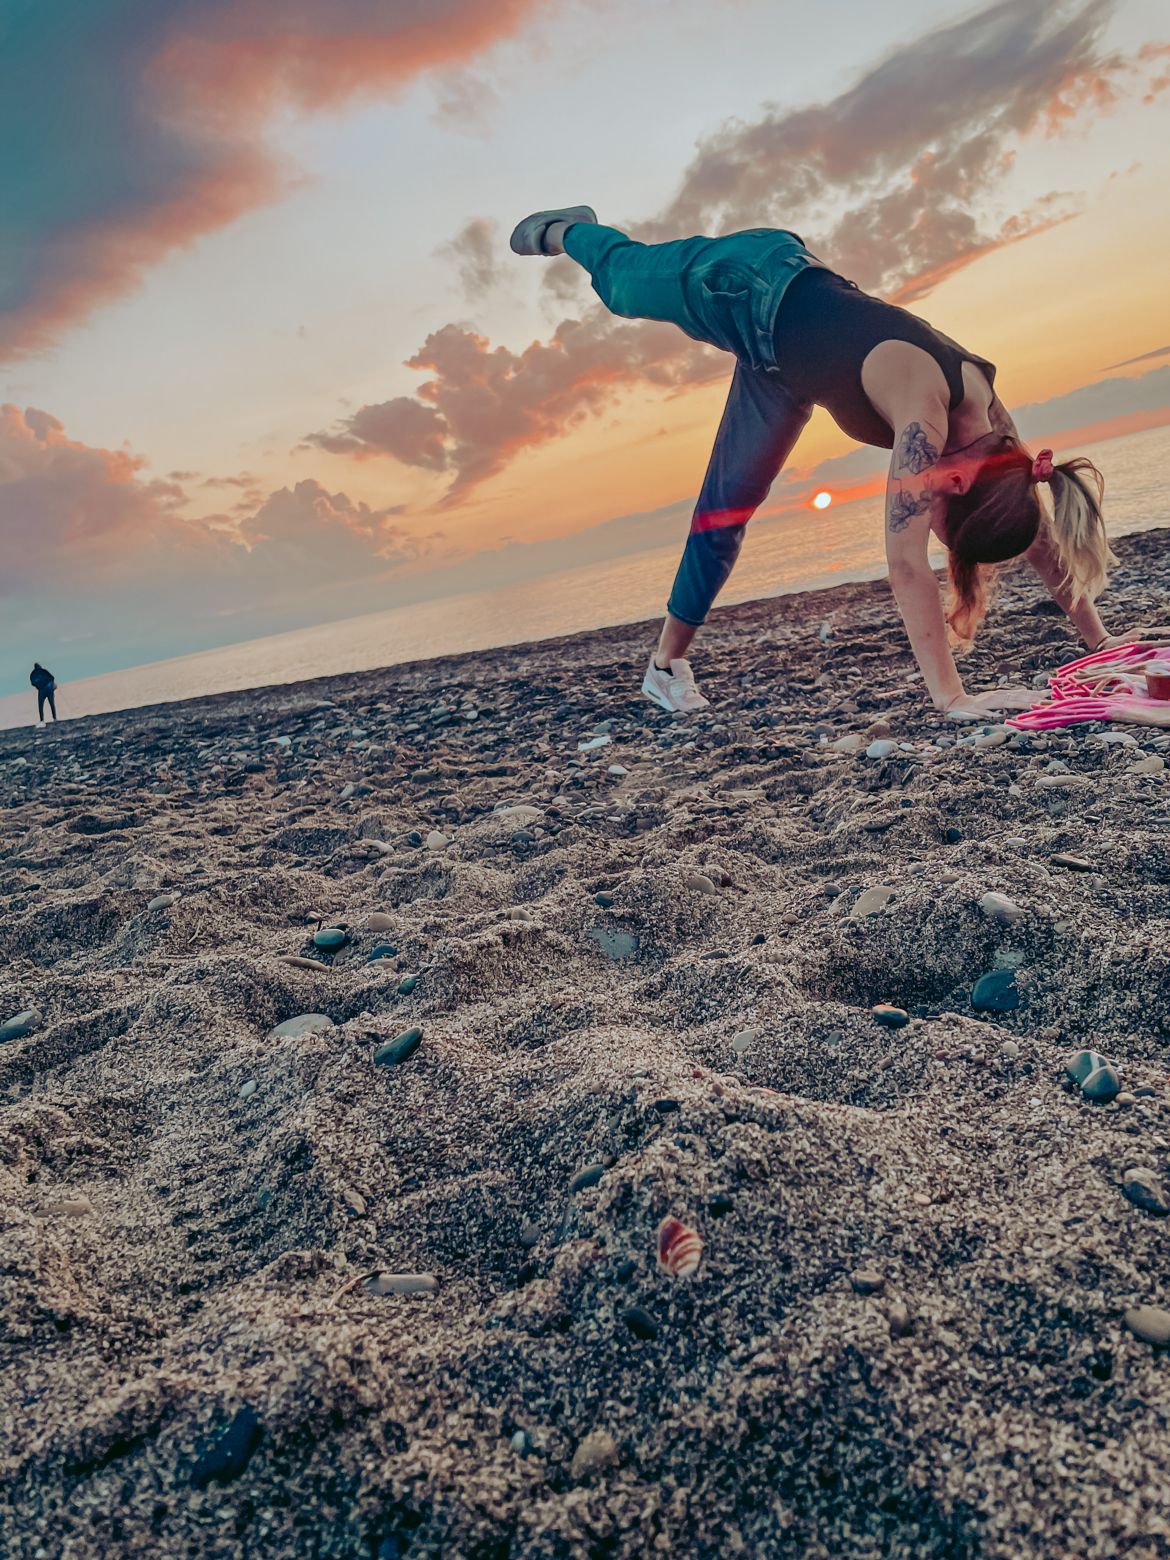 Agata doing a handstand on the beach as the sun is setting in the background